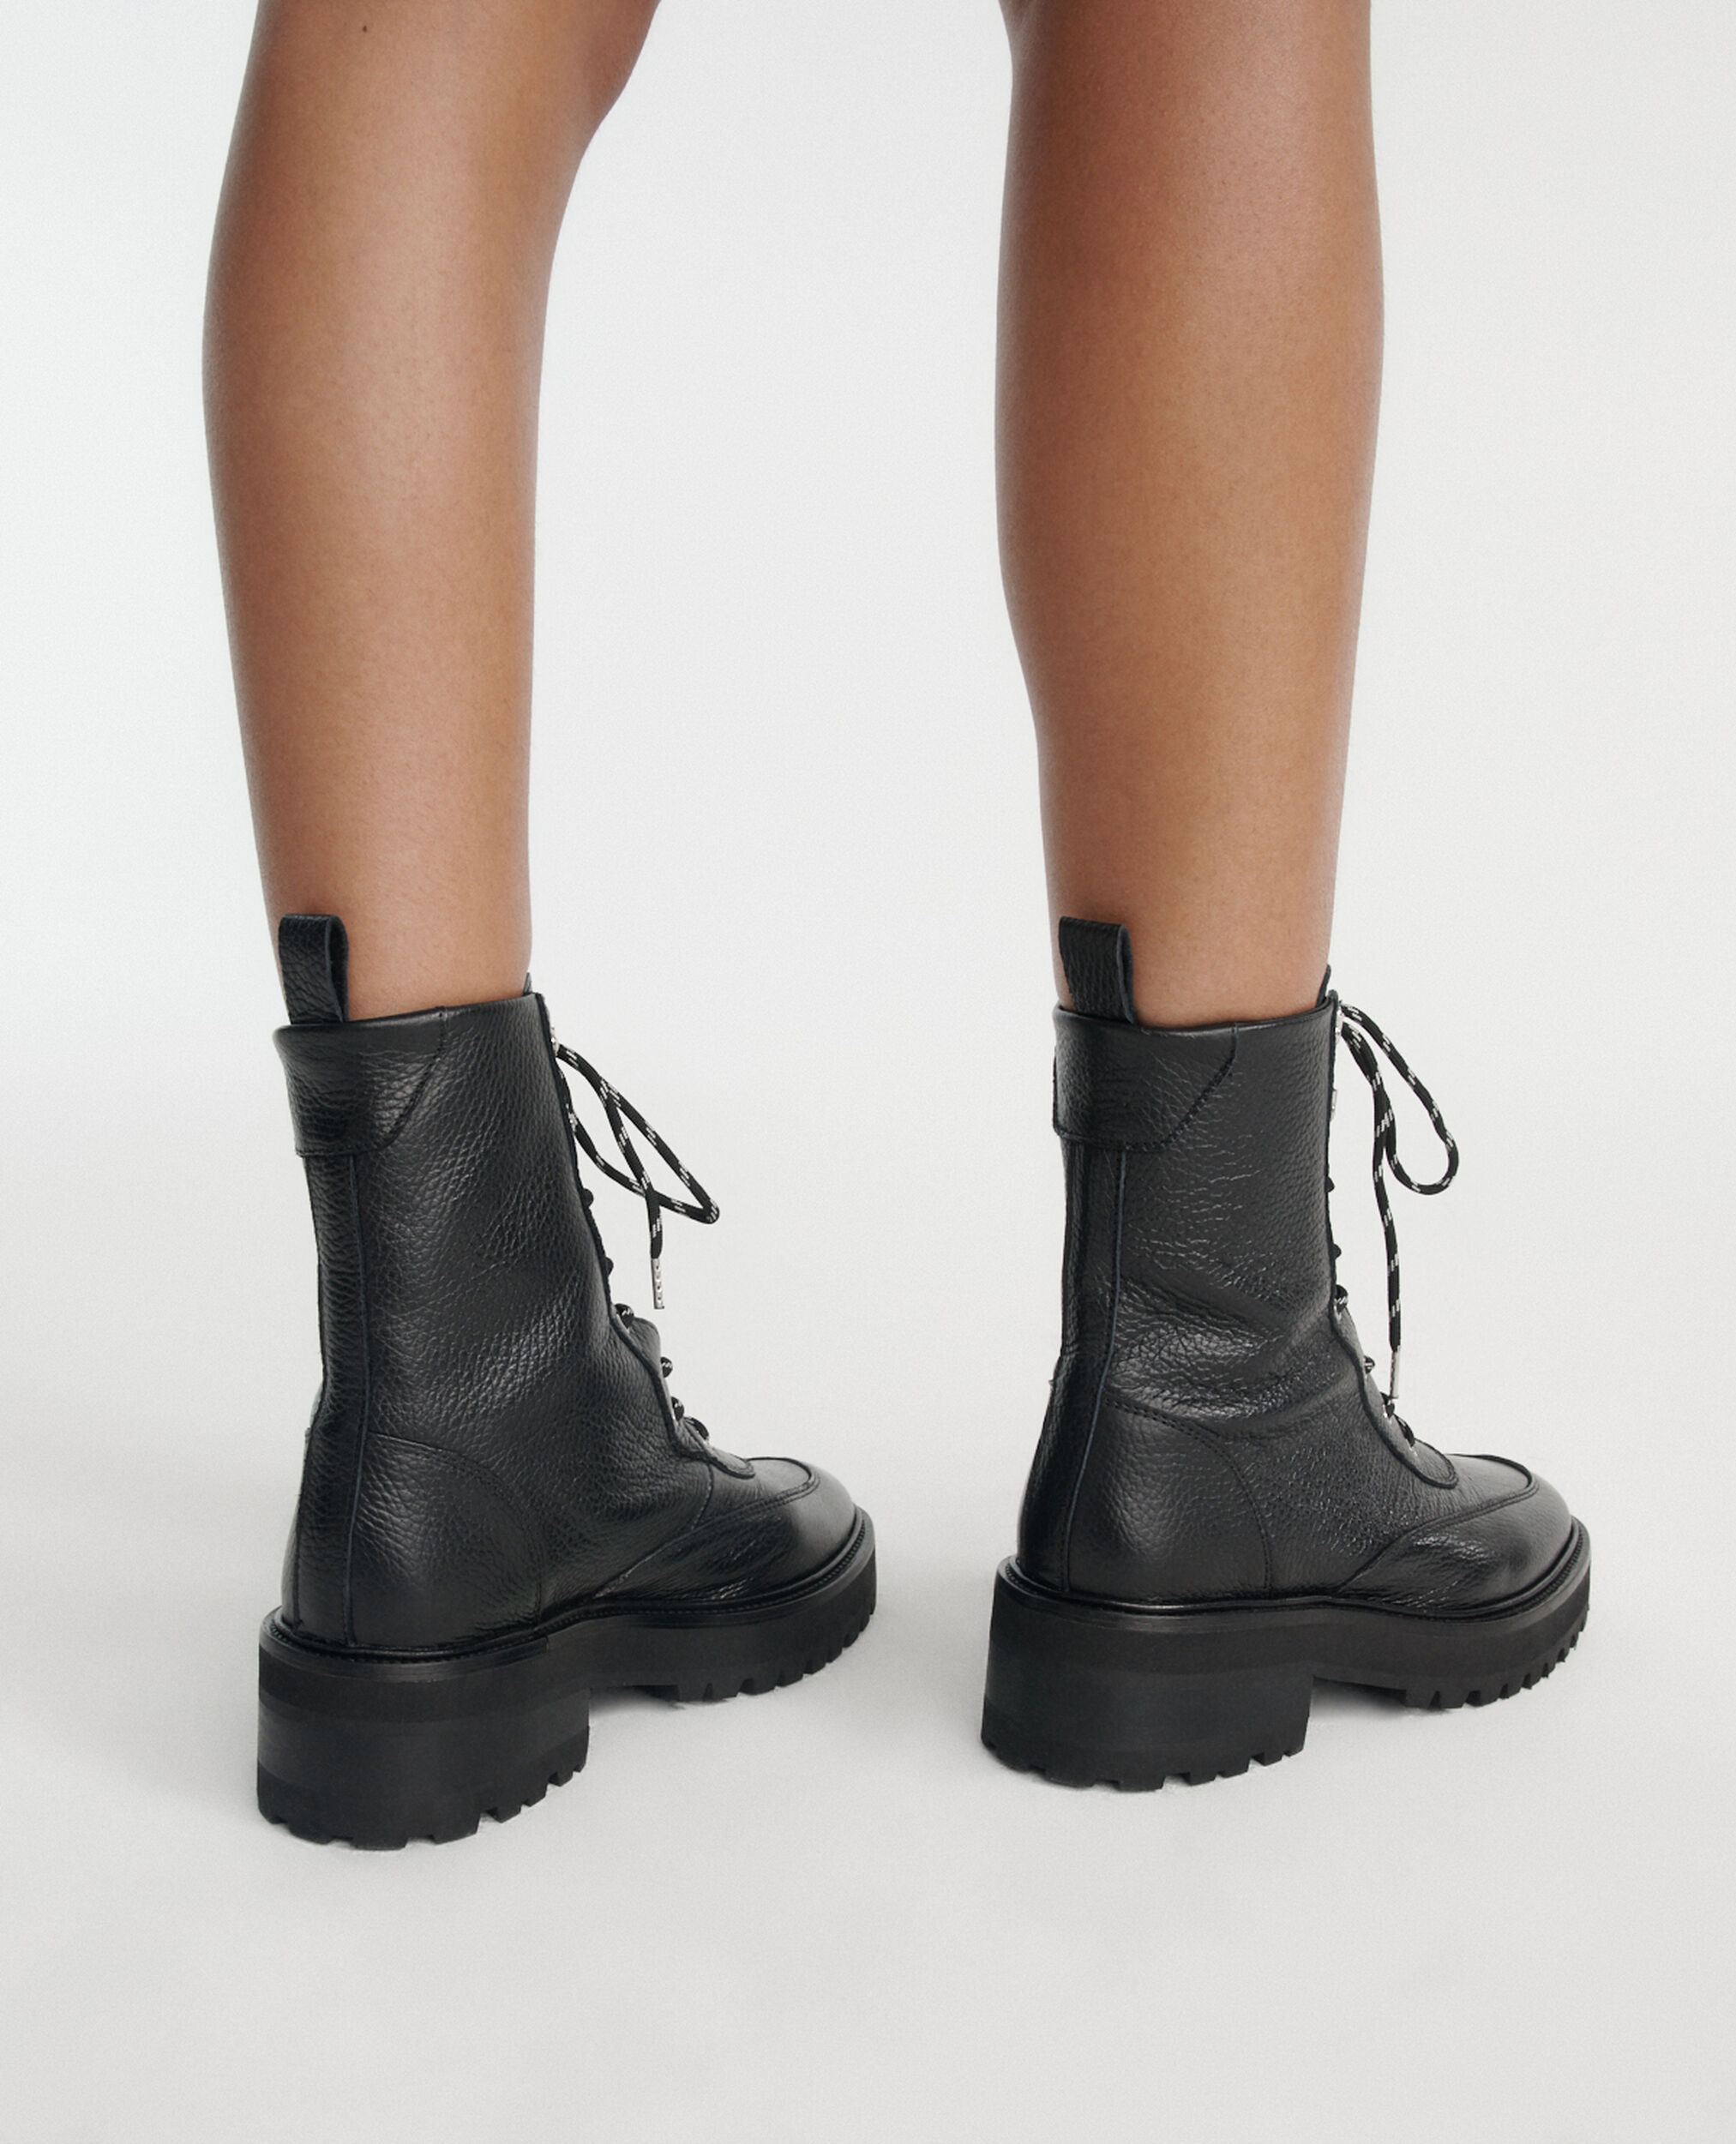 High black leather boots in ranger style, BLACK, hi-res image number null